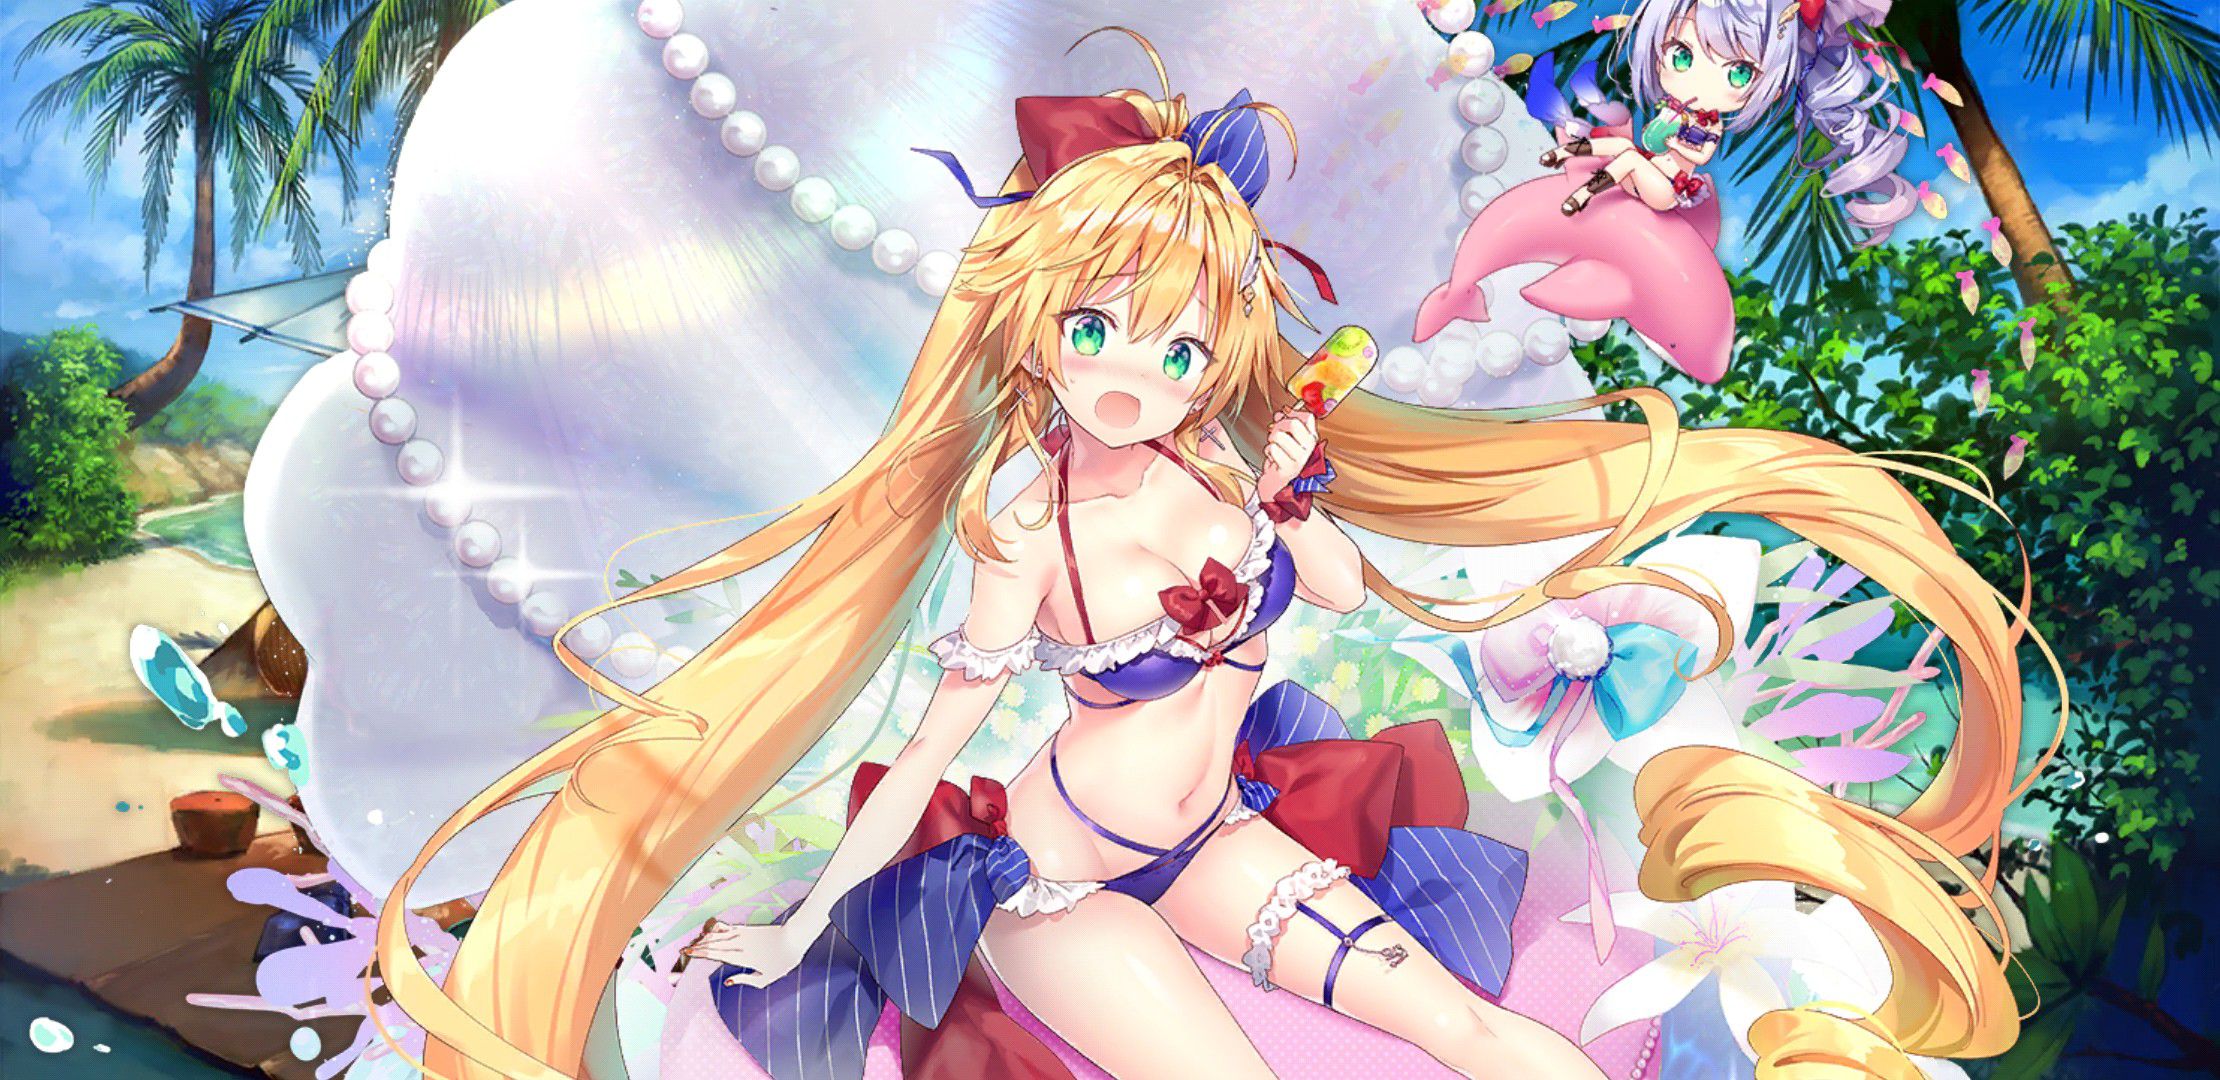 【There is an image】 Smartphone that urges charging with erotic swimsuits is malicious 36